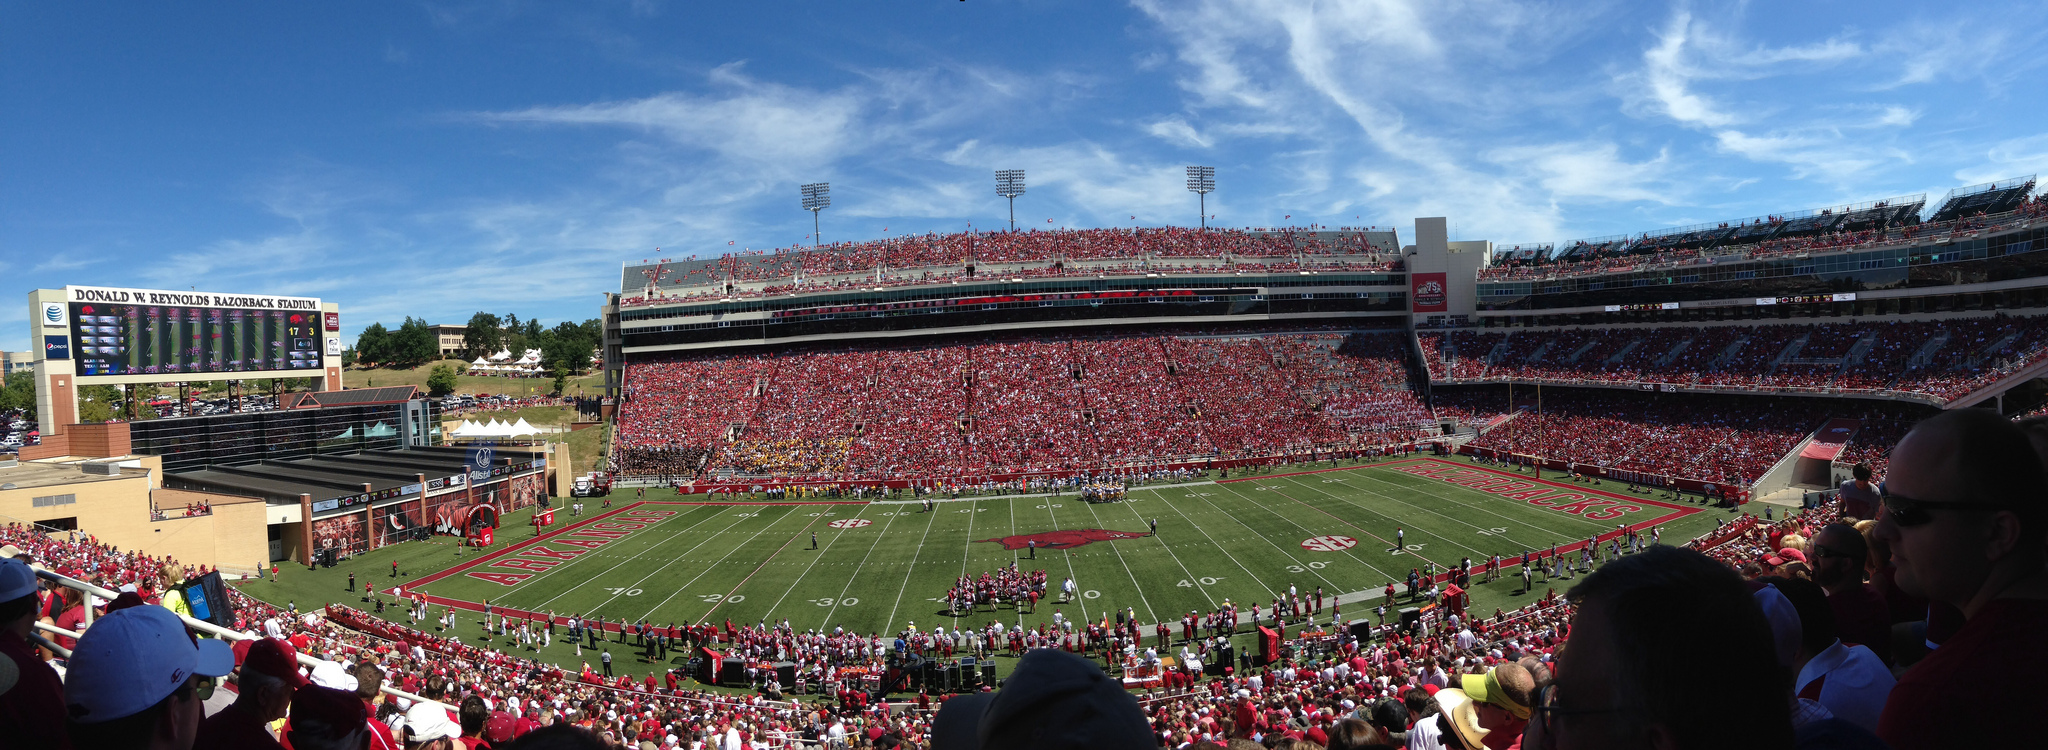 Razorback Stadium Facts, figures, pictures and more of the Arkansas